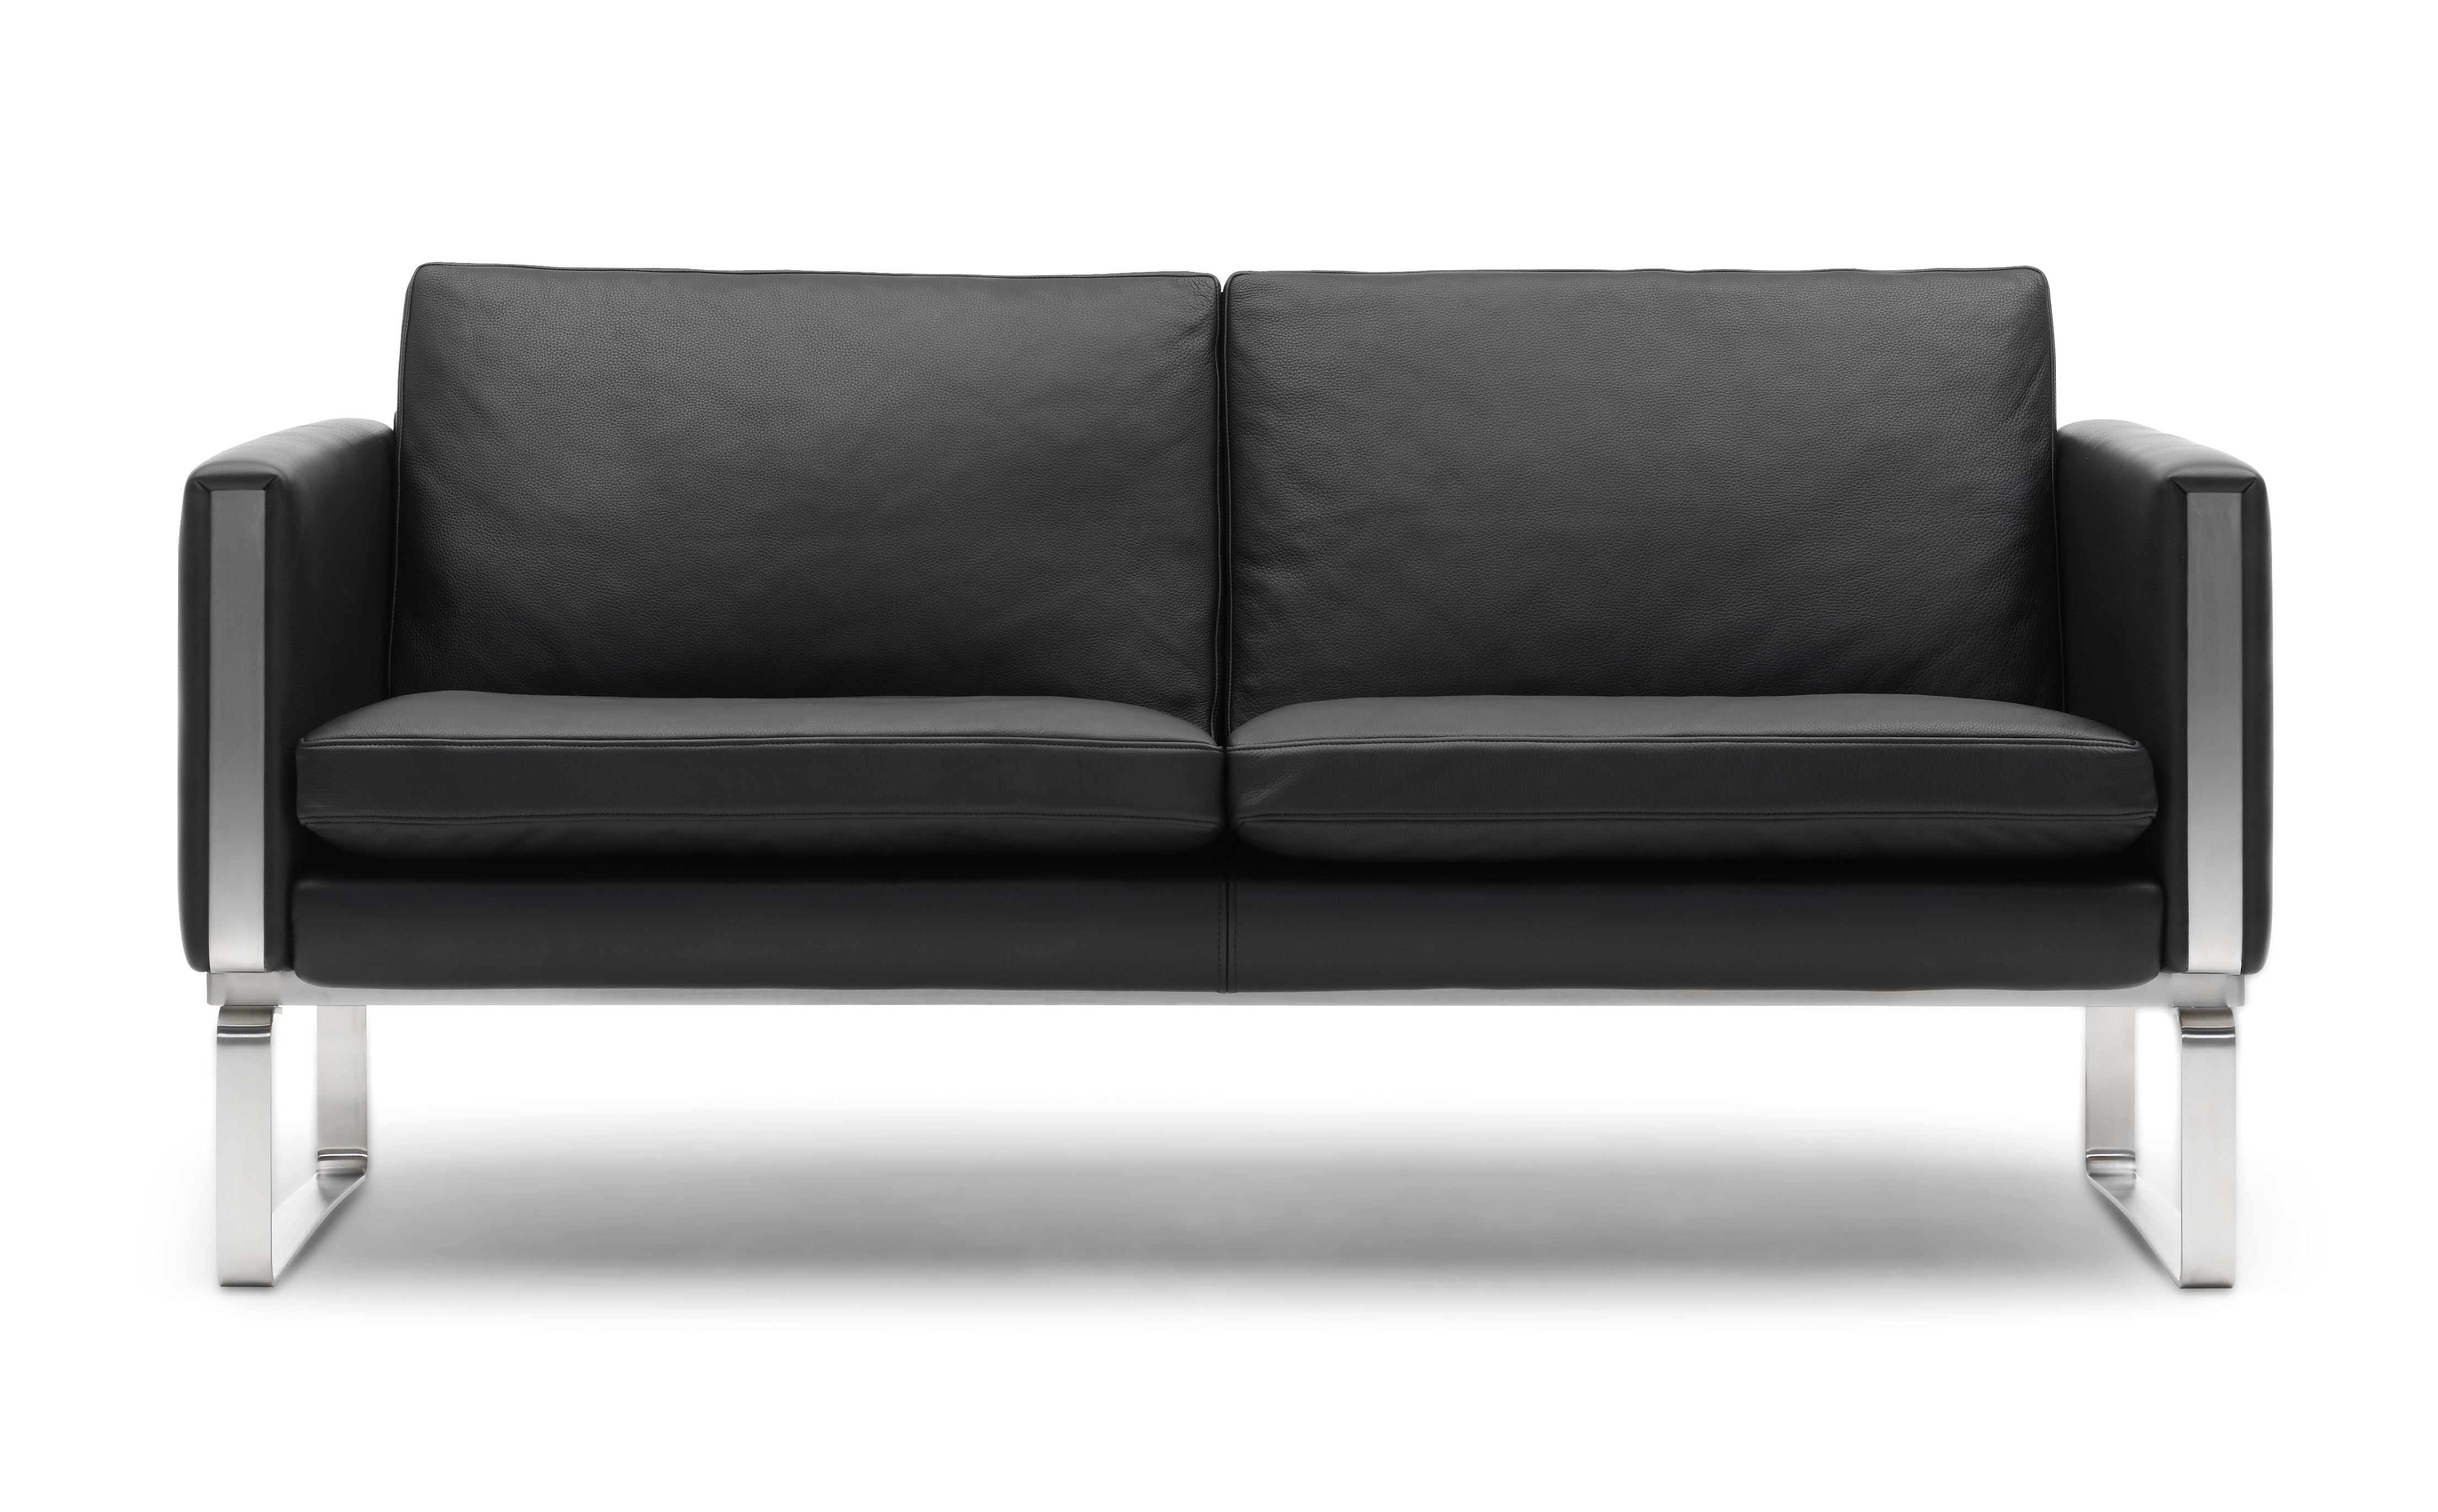 CH102 Lounge seating, 2 personen CARB2 thor 301 HR FSC®70%